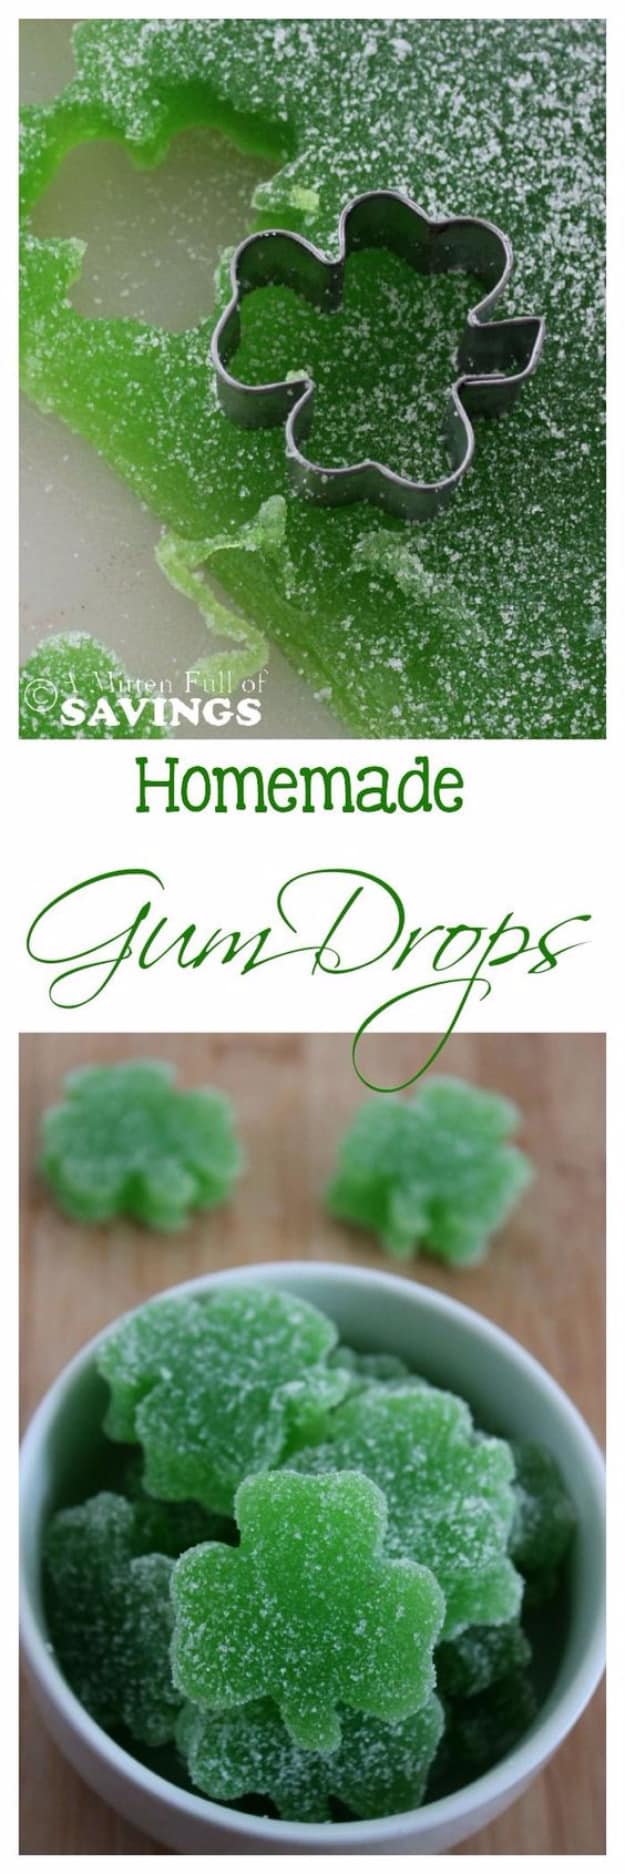 DIY St Patricks Day Ideas - Homemade Gum Drops - Food and Best Recipes, Decorations and Home Decor, Party Ideas - Cupcakes, Drinks, Festive St Patrick Day Parties With these Easy, Quick and Cool Crafts and DIY Projects http://diyjoy.com/st-patricks-day-ideas